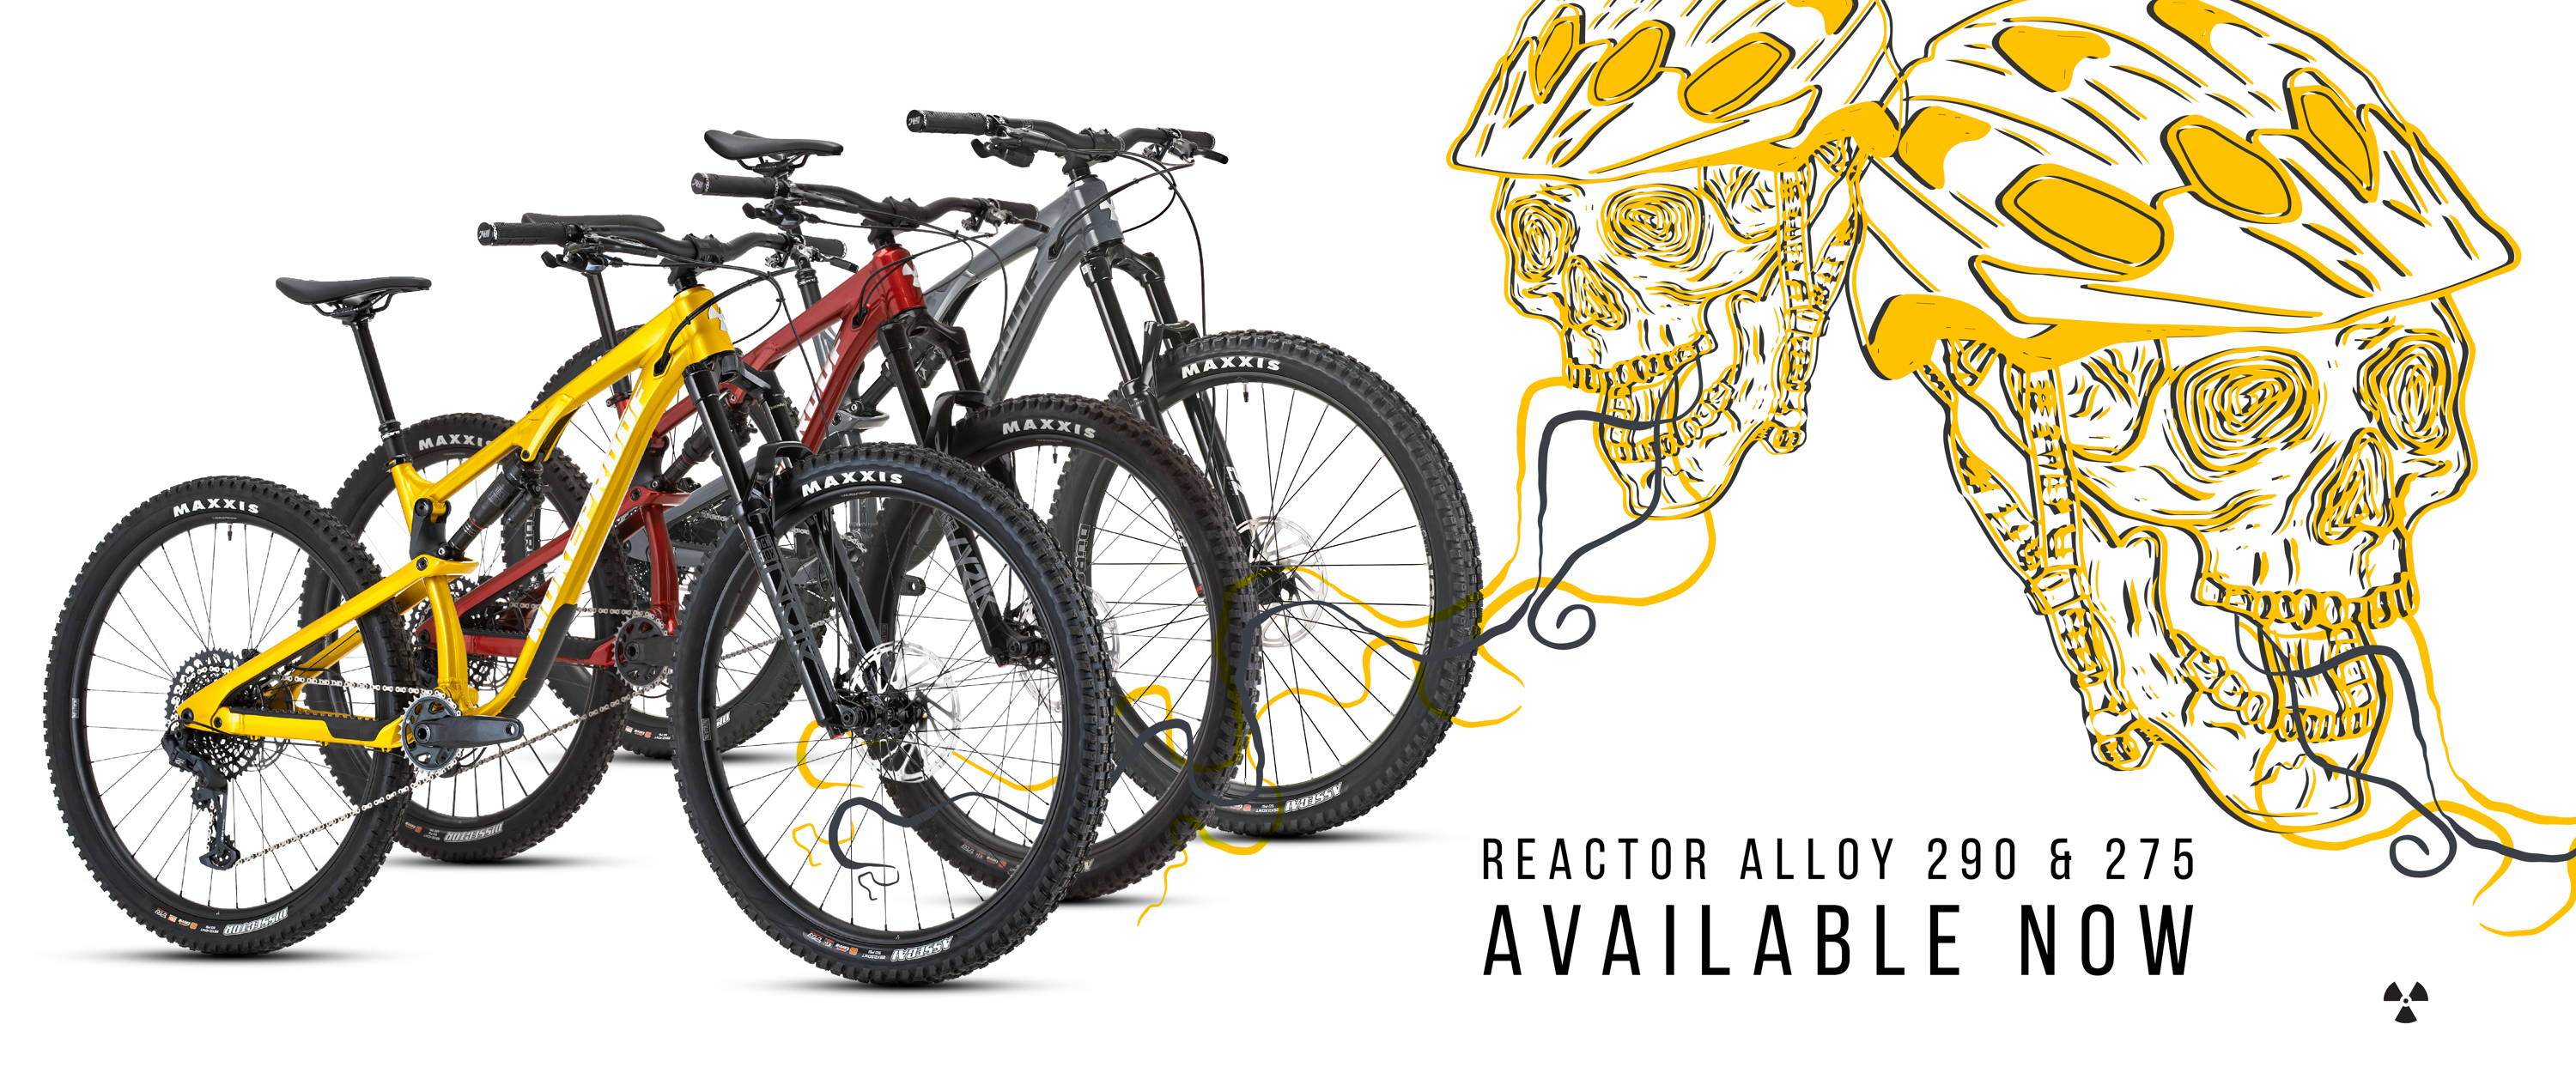 Nukeproof Reactor Alloy graphic